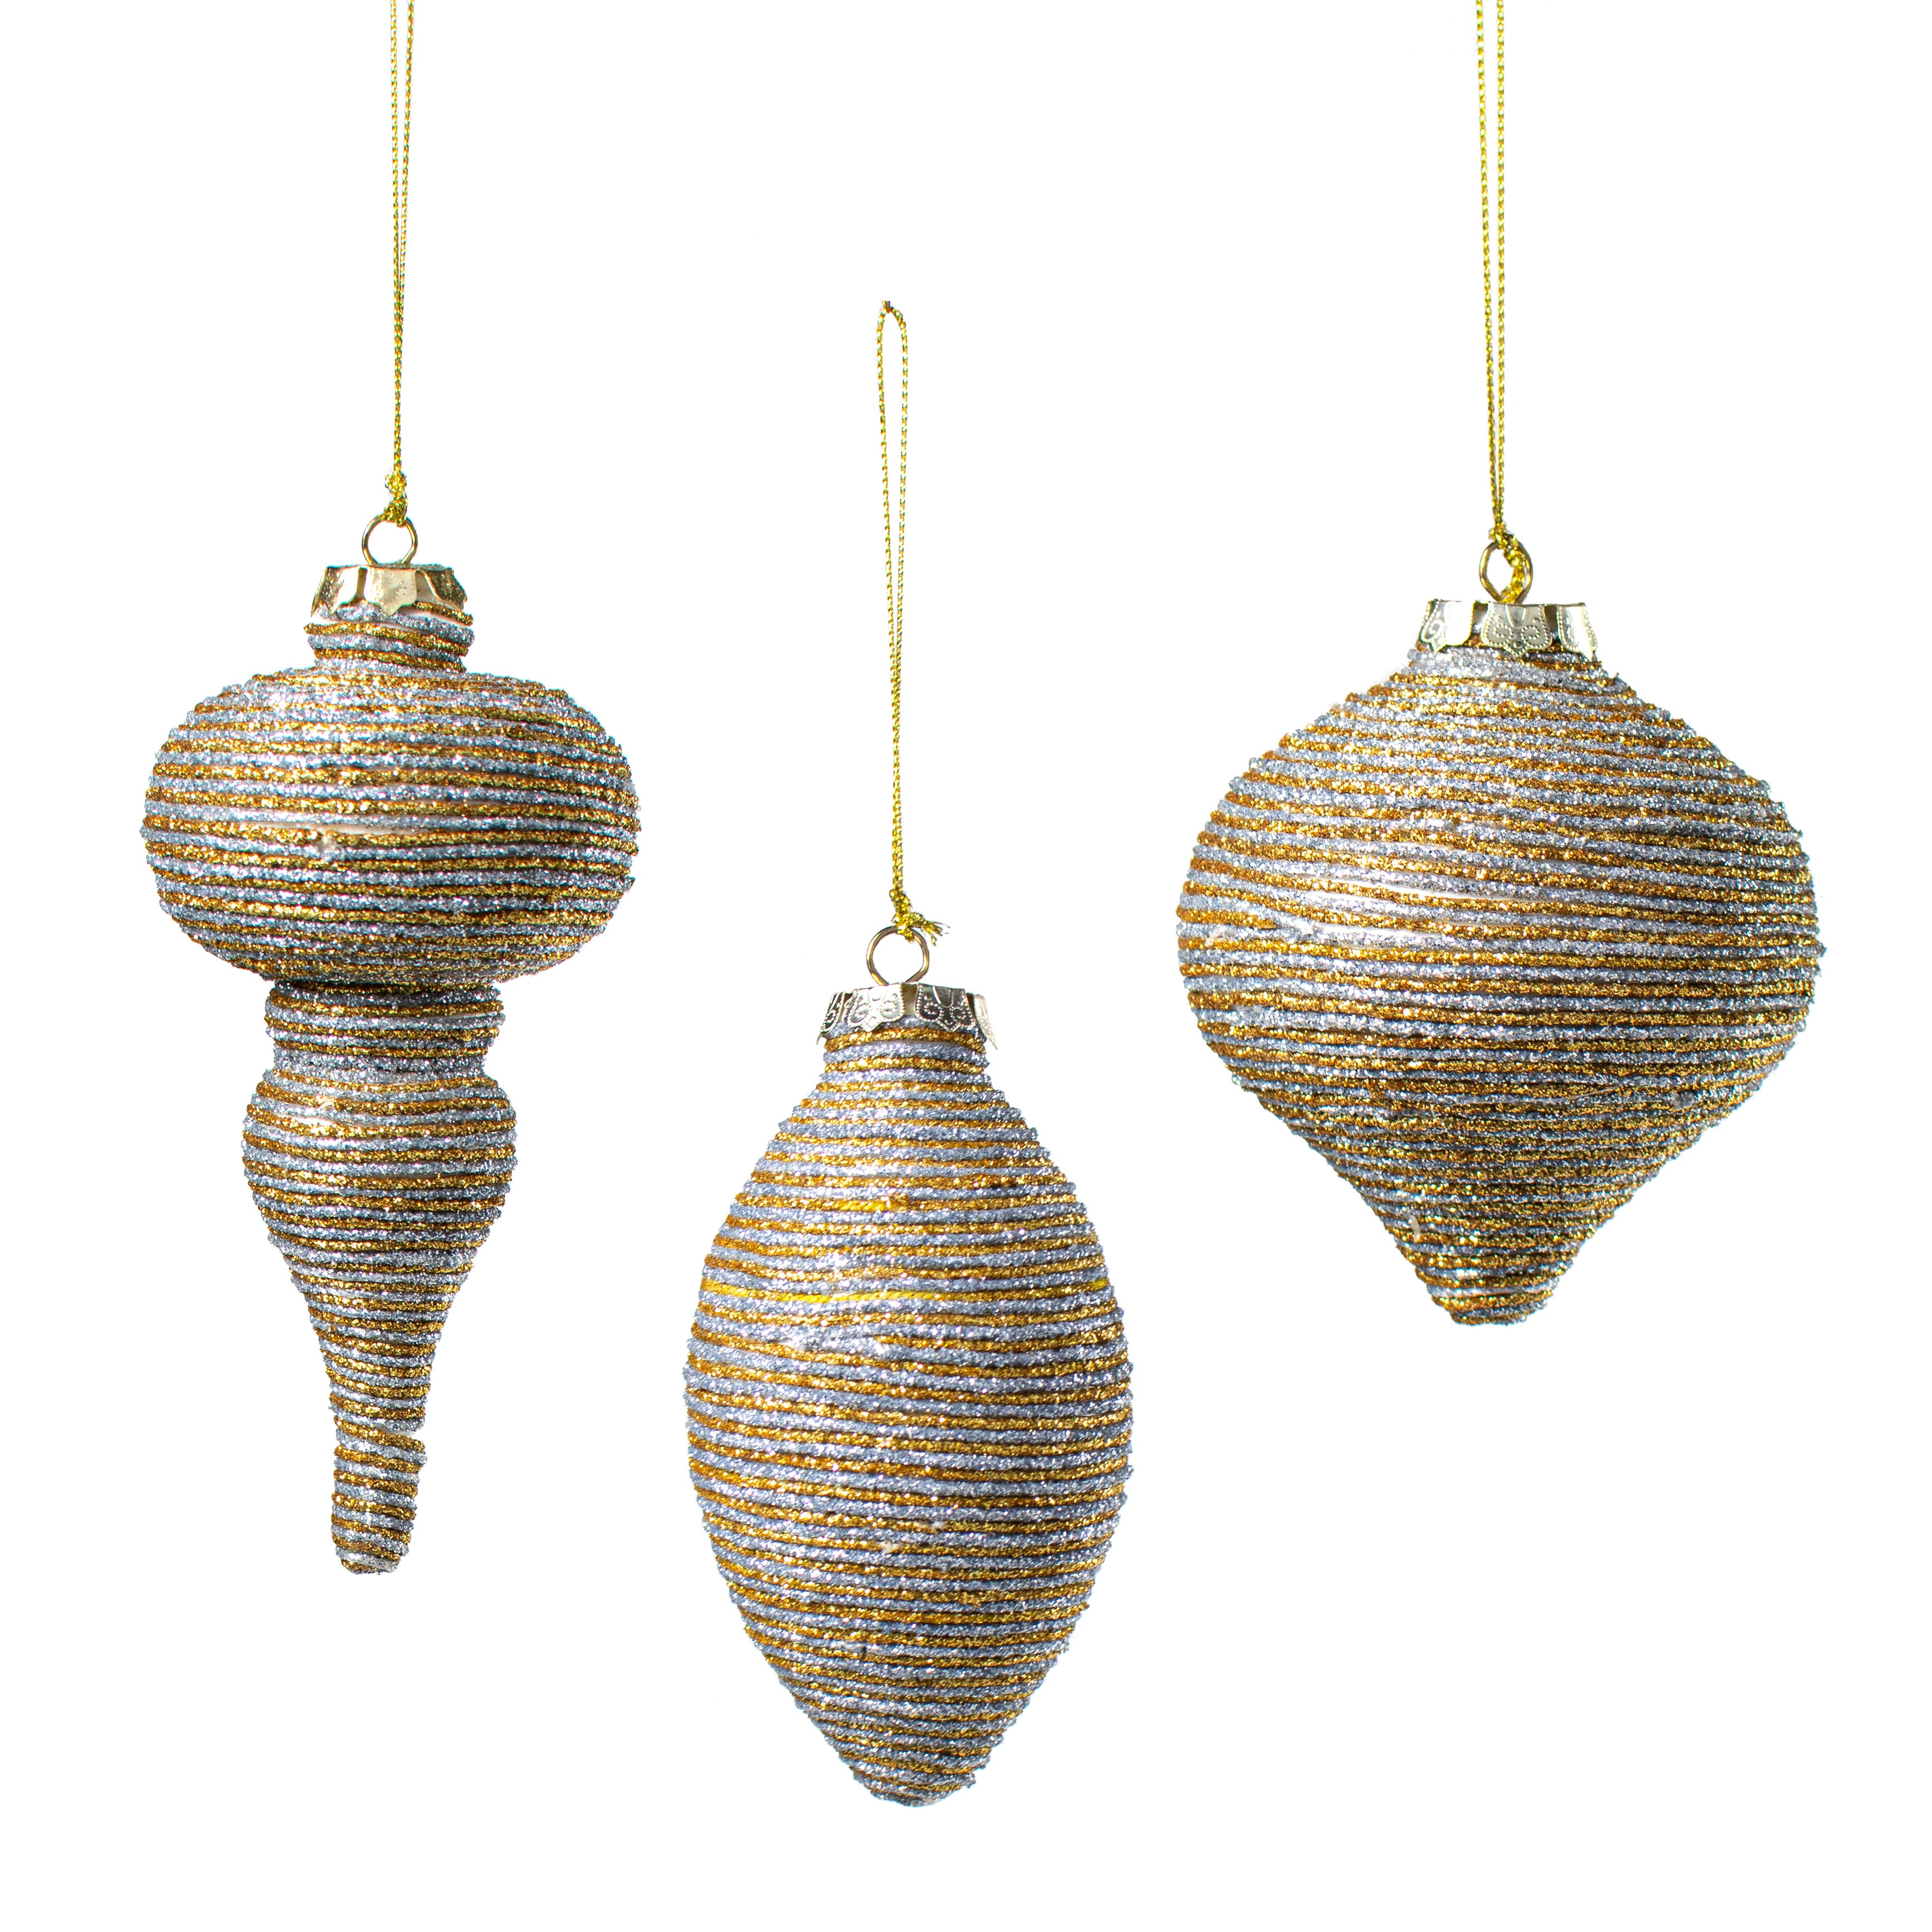 Glitter Rope Ornaments: Gold/Silver (Set of 3)